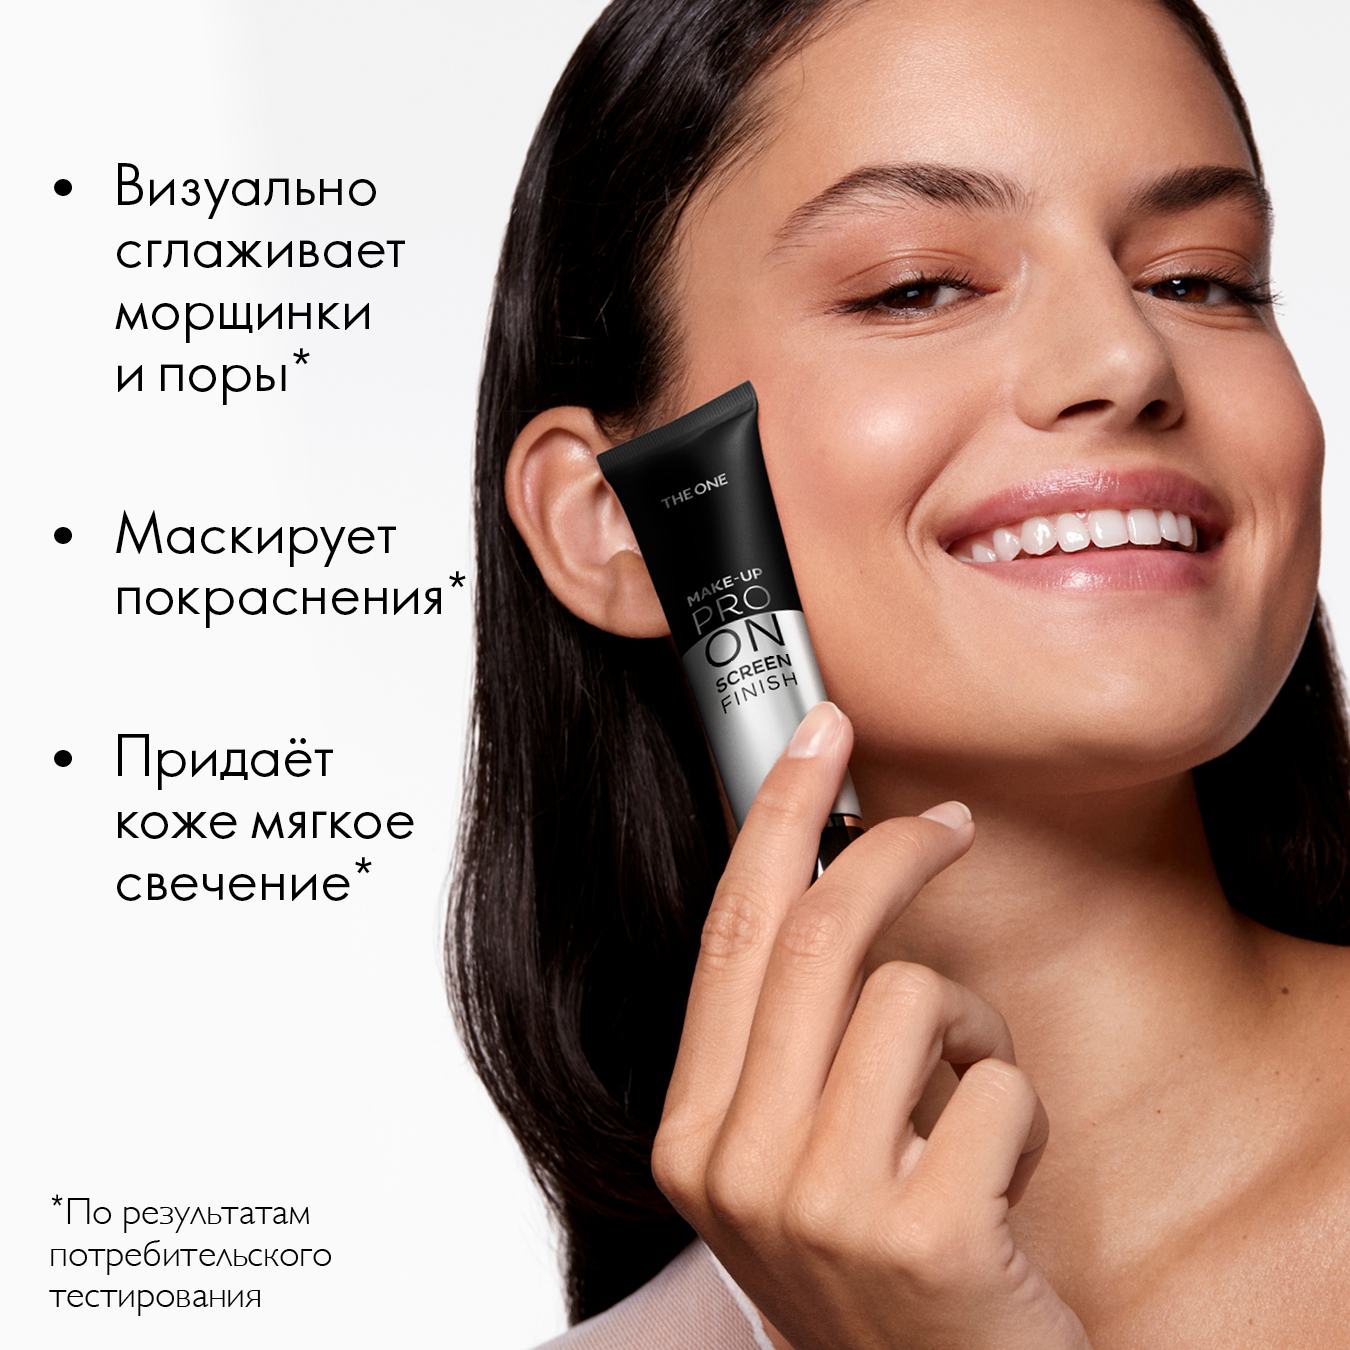 https://media-cdn.oriflame.com/productImage?externalMediaId=product-management-media%2fProducts%2f44547%2fRU%2f44547_6.png&id=17749214&version=1